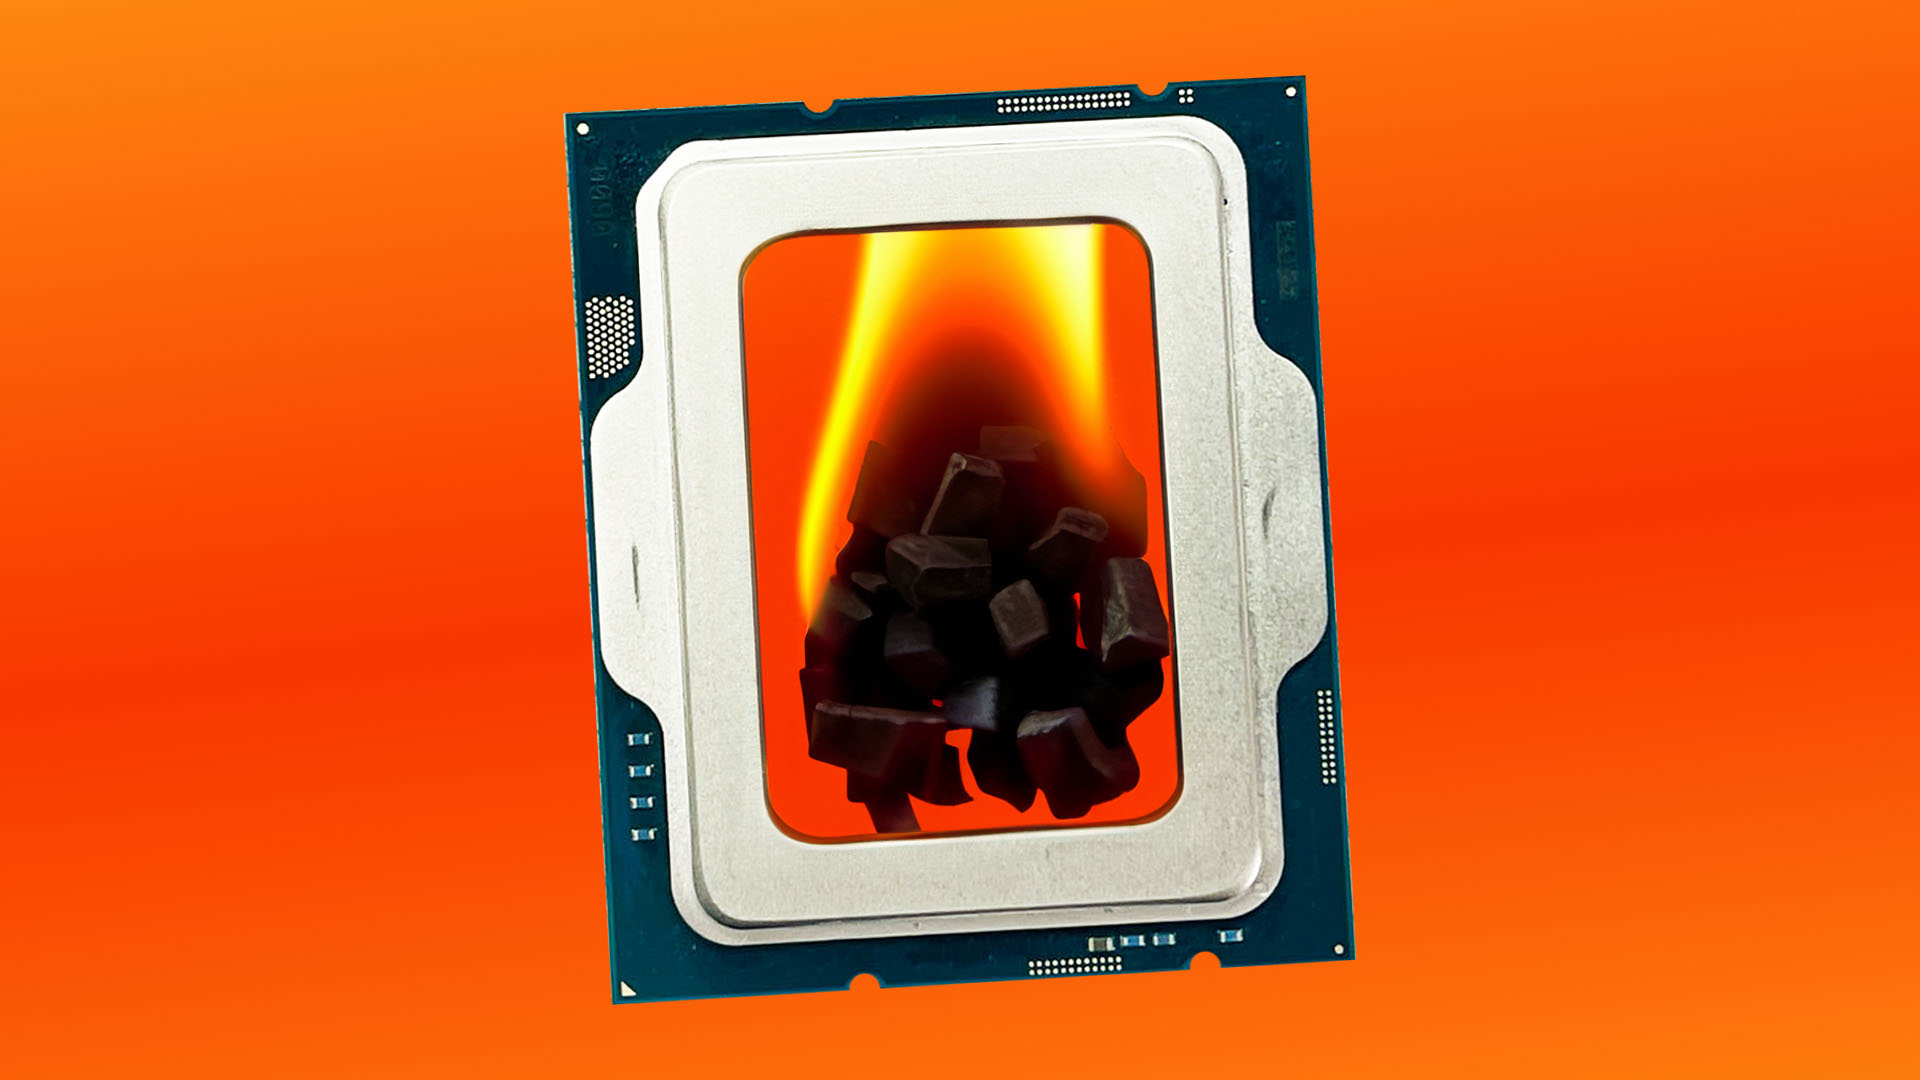 Intel is abandoning high clock speeds on new CPUs, according to leak